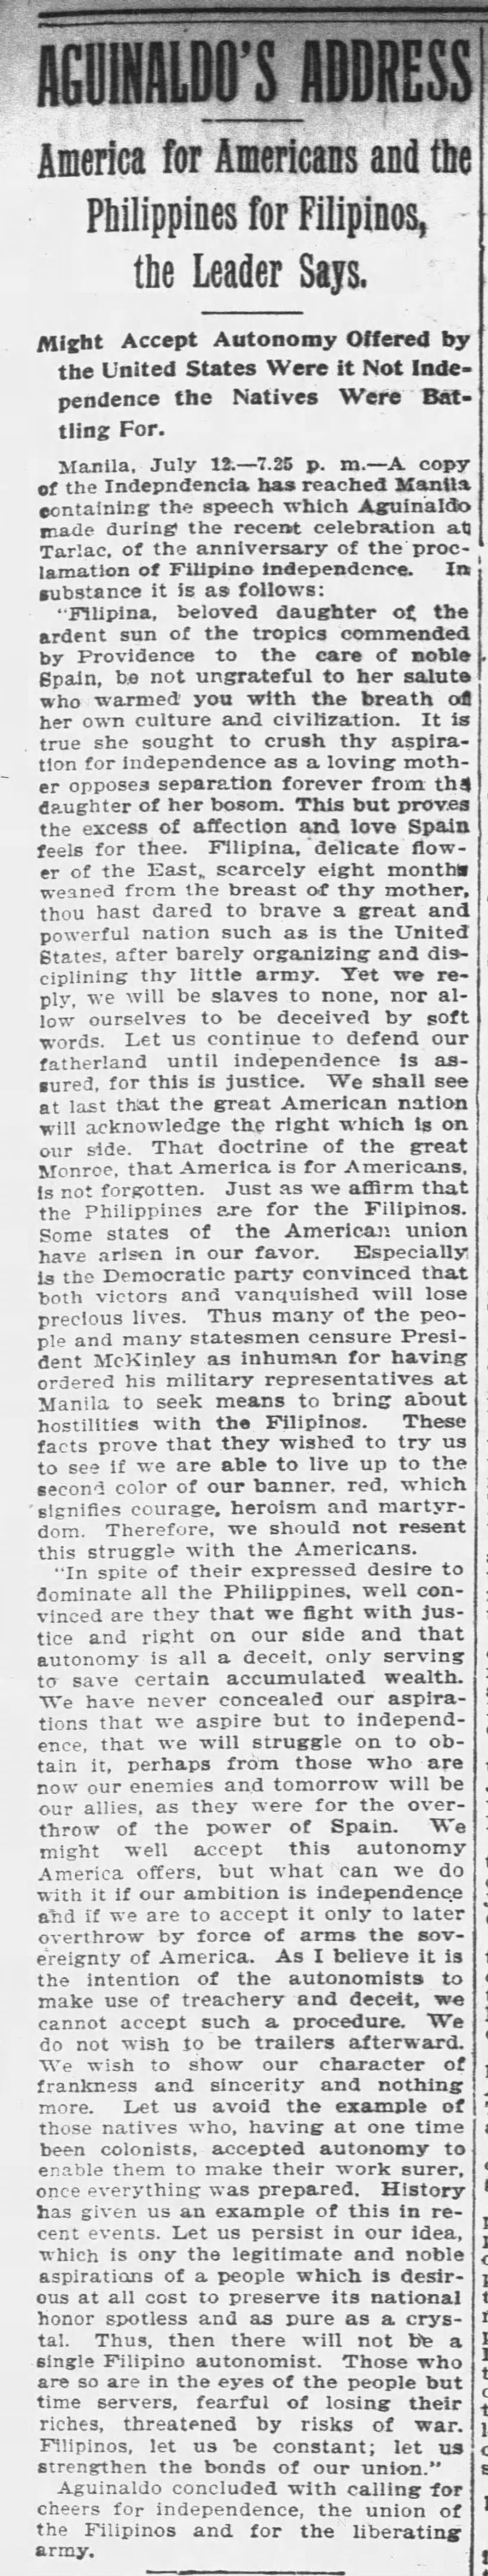 Newspaper prints copy of a speech by Emilio Aguinaldo about Philippine independence